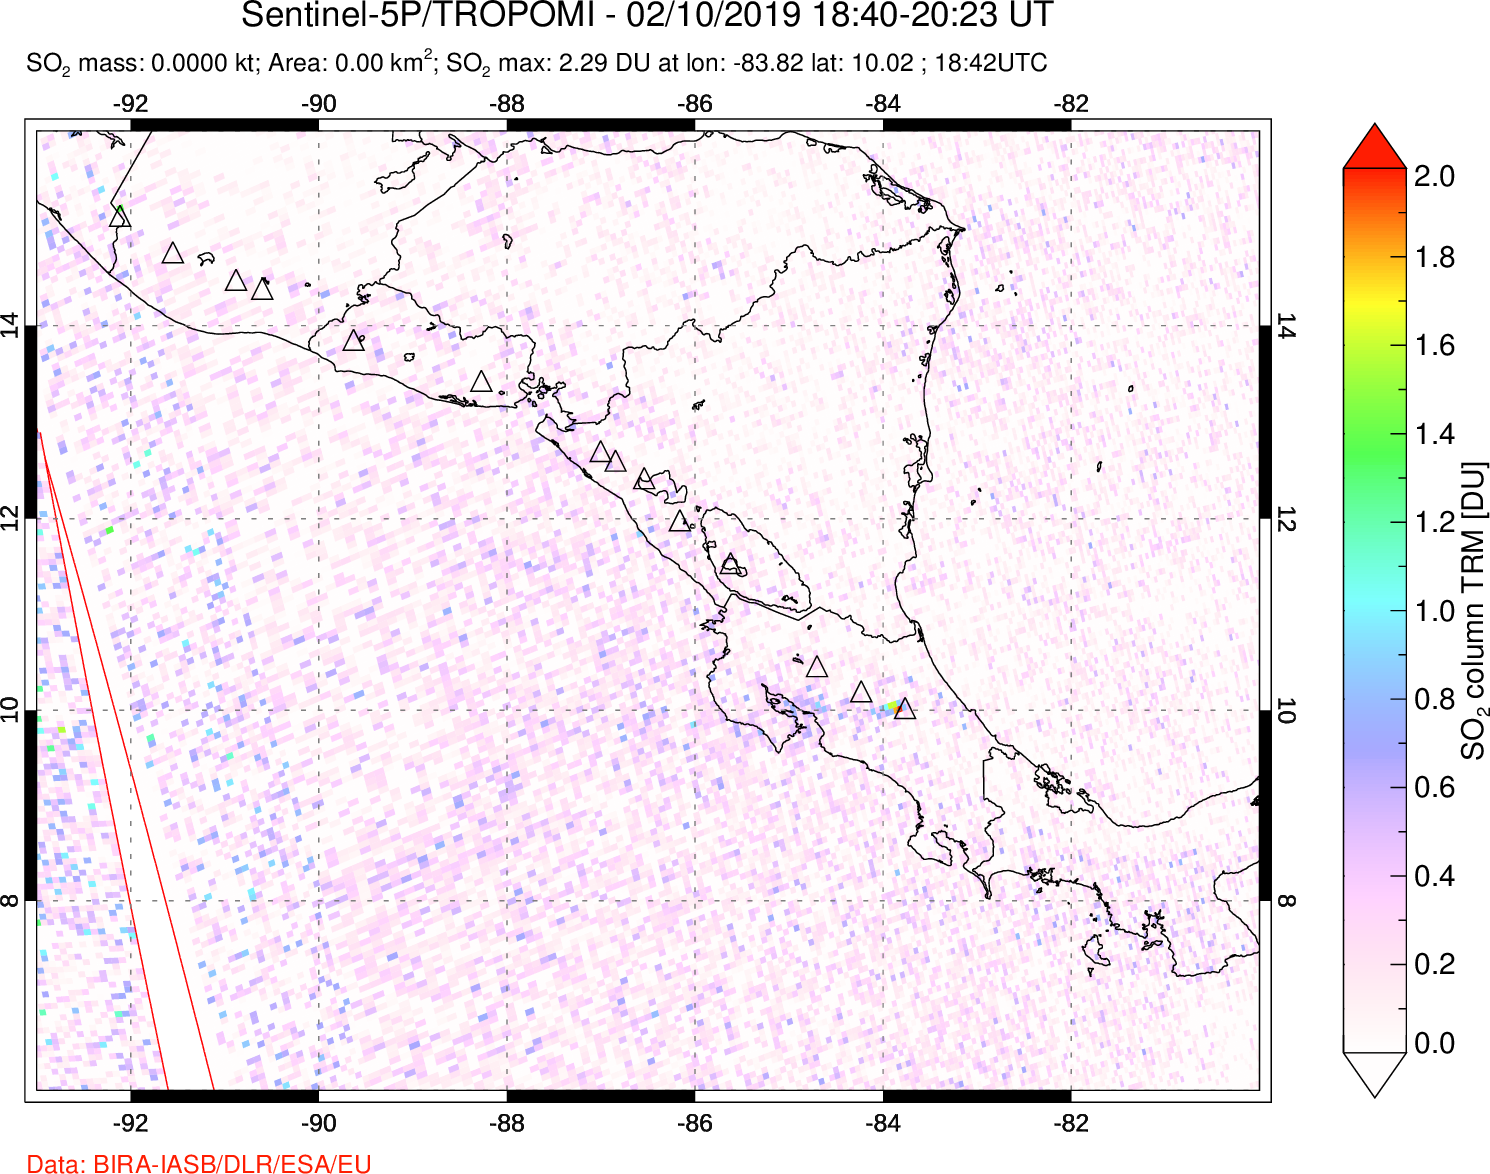 A sulfur dioxide image over Central America on Feb 10, 2019.